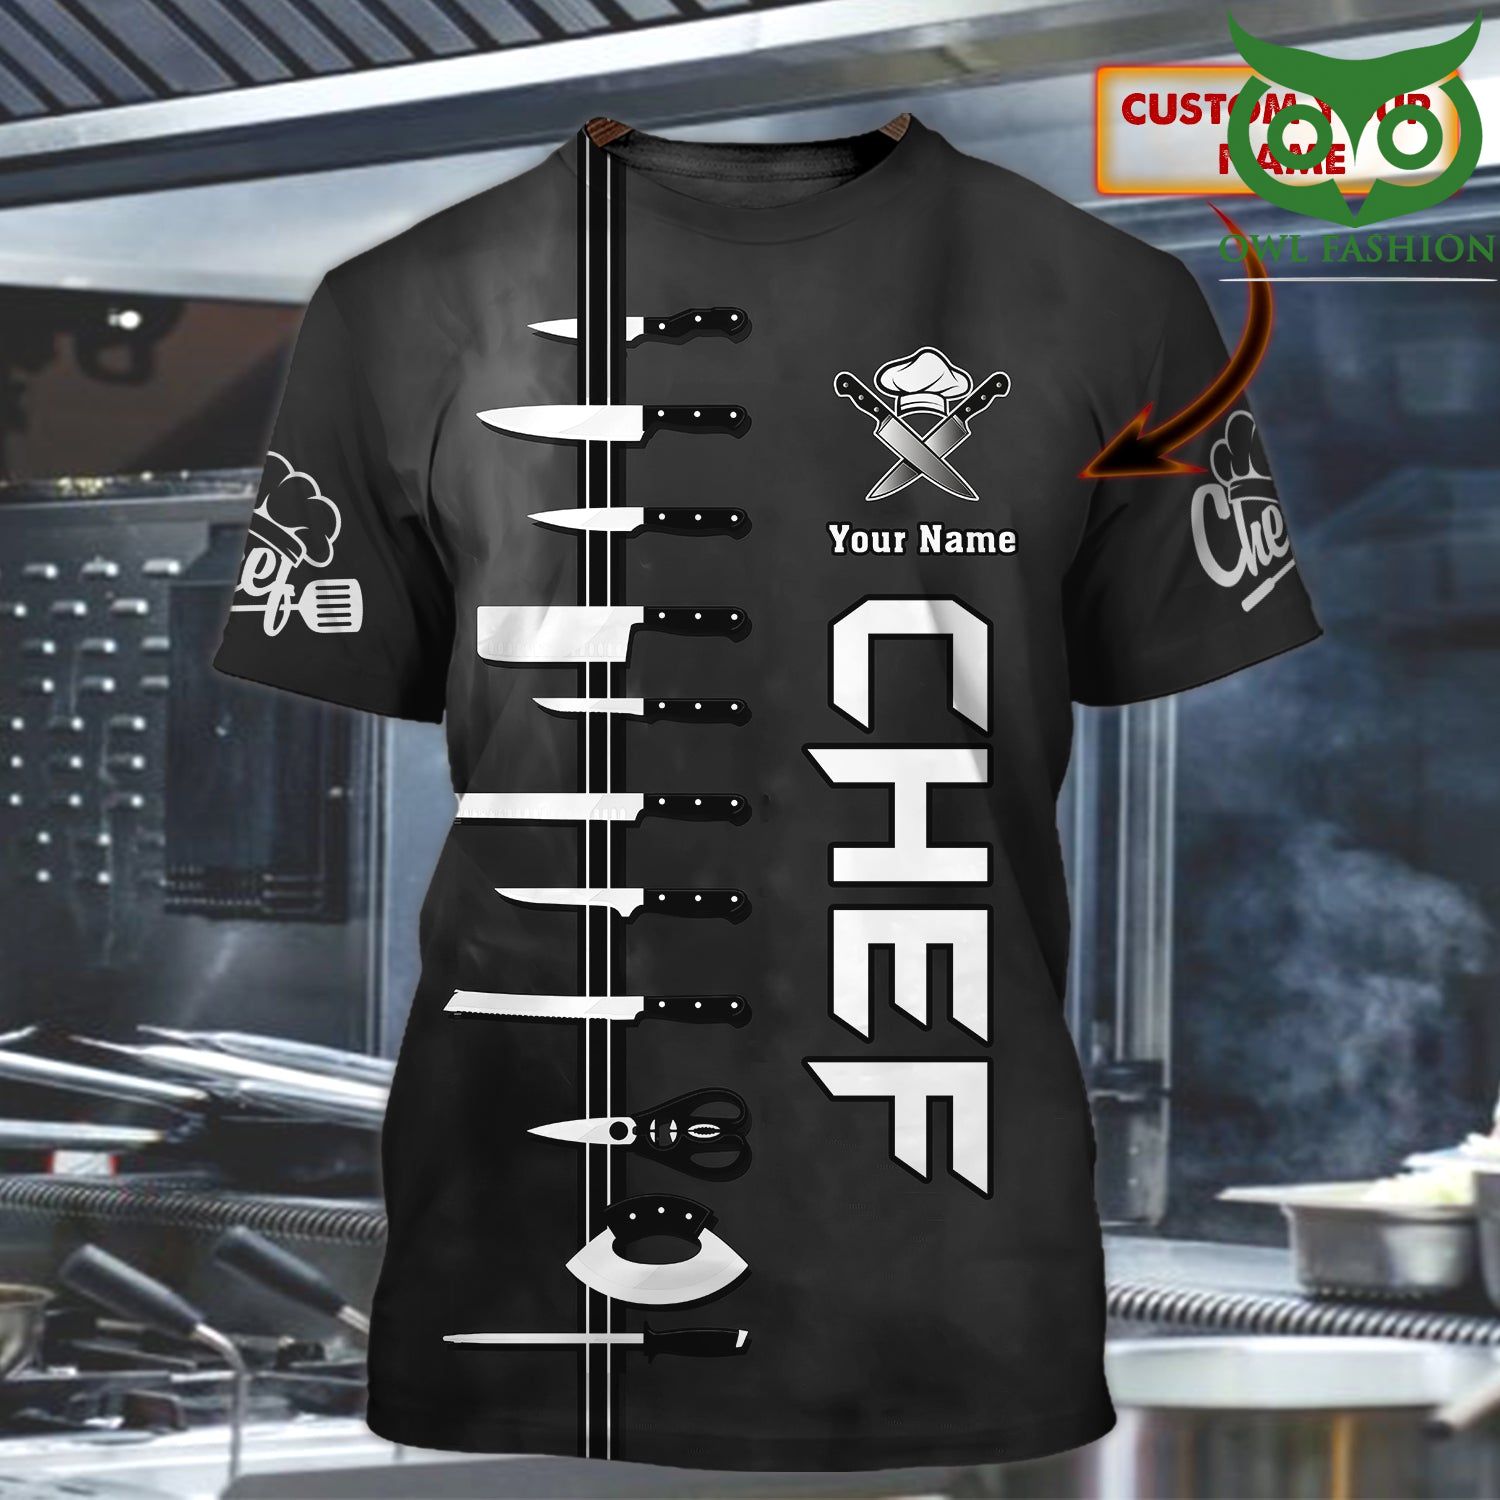 3 CHEF Knives Personalized Name black 3D Tshirt